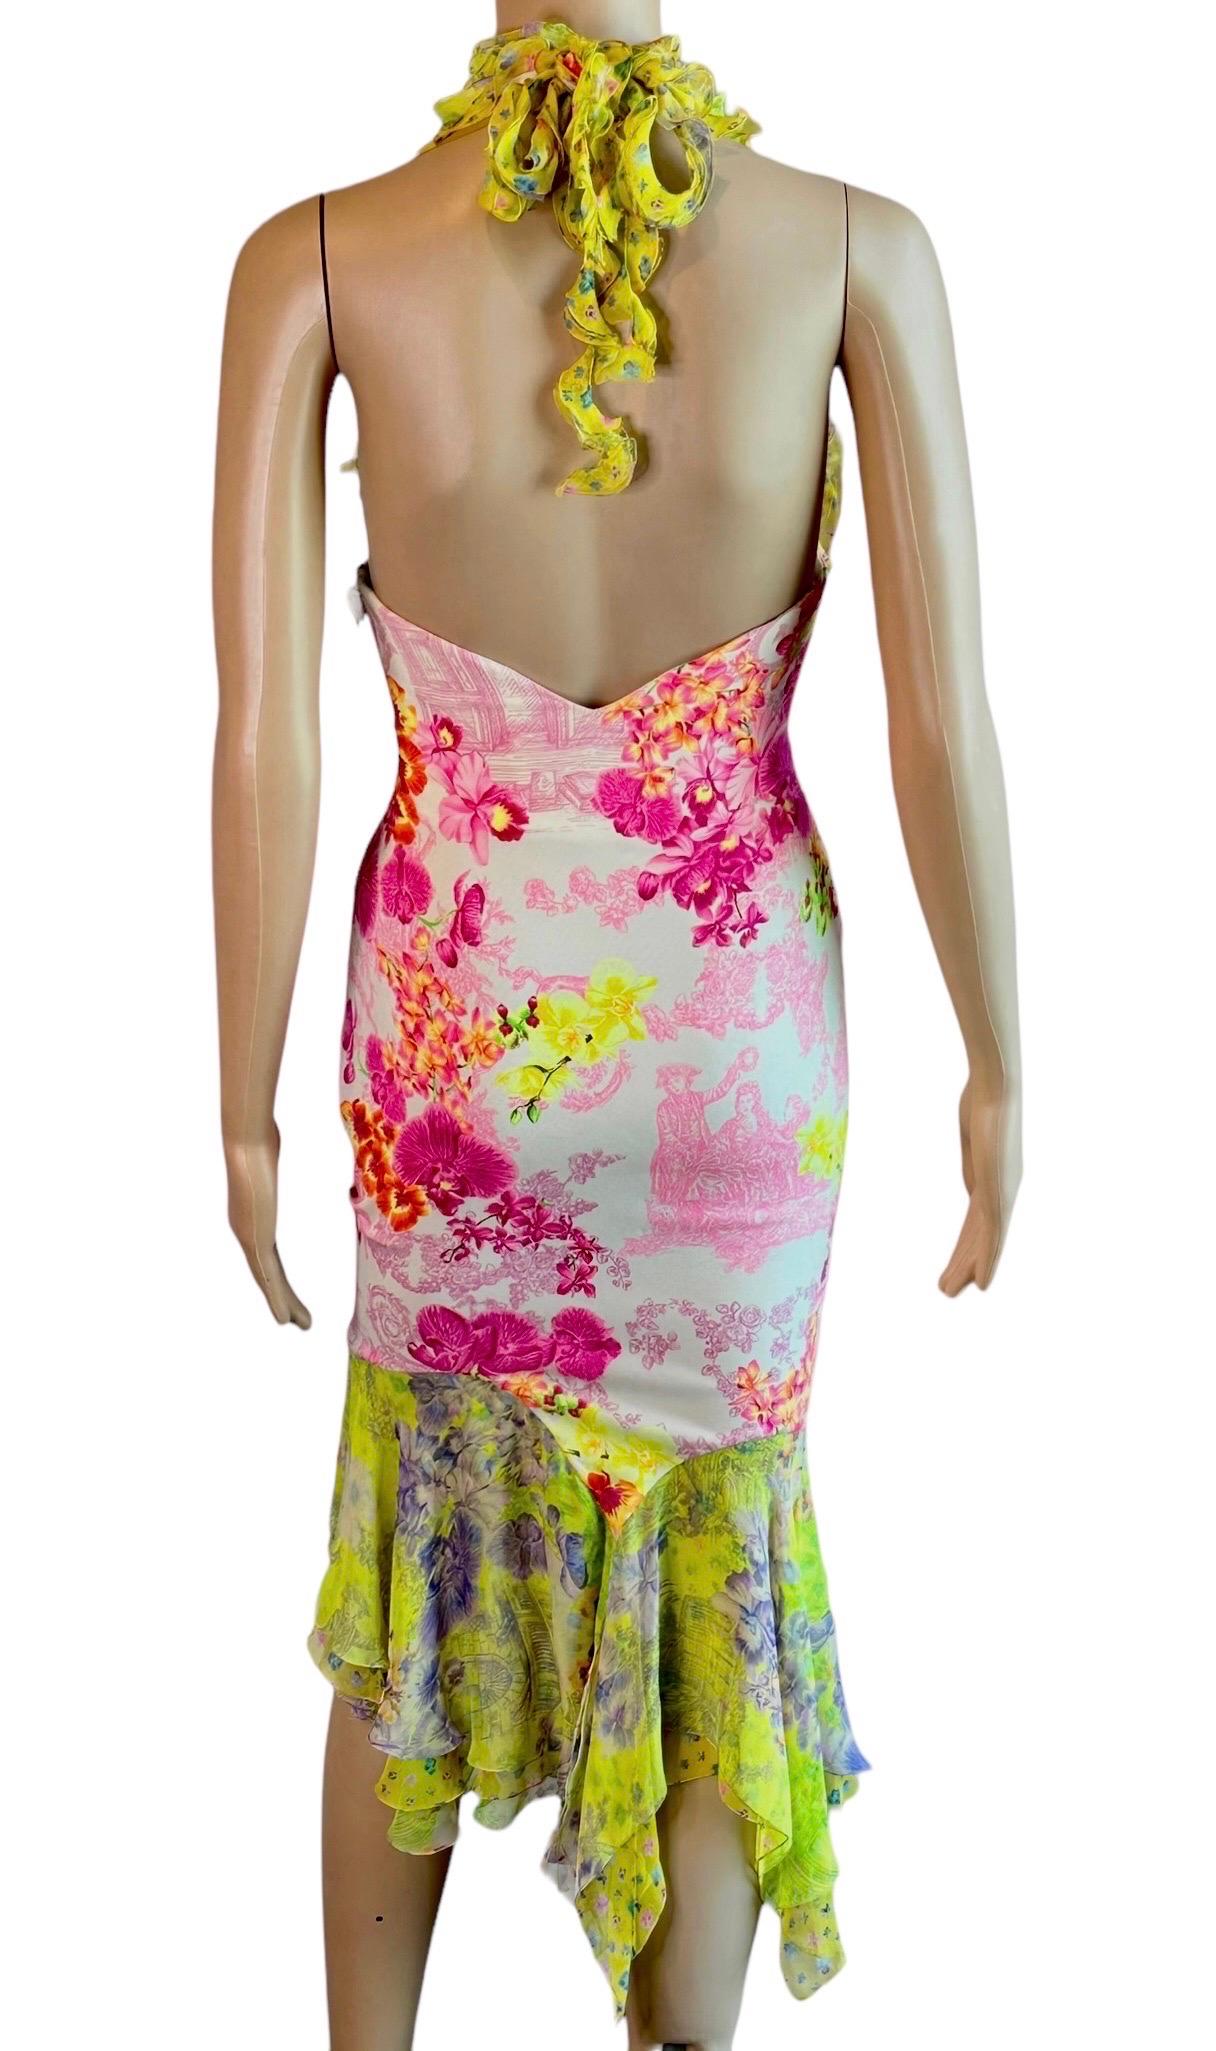 Versace S/S 2004 Runway Floral Print Plunging Neckline Ruffle Accents Low Back Dress IT 42

Look 5 from the Spring 2004 Collection.

FOLLOW US ON INSTAGRAM @OPULENTADDICT